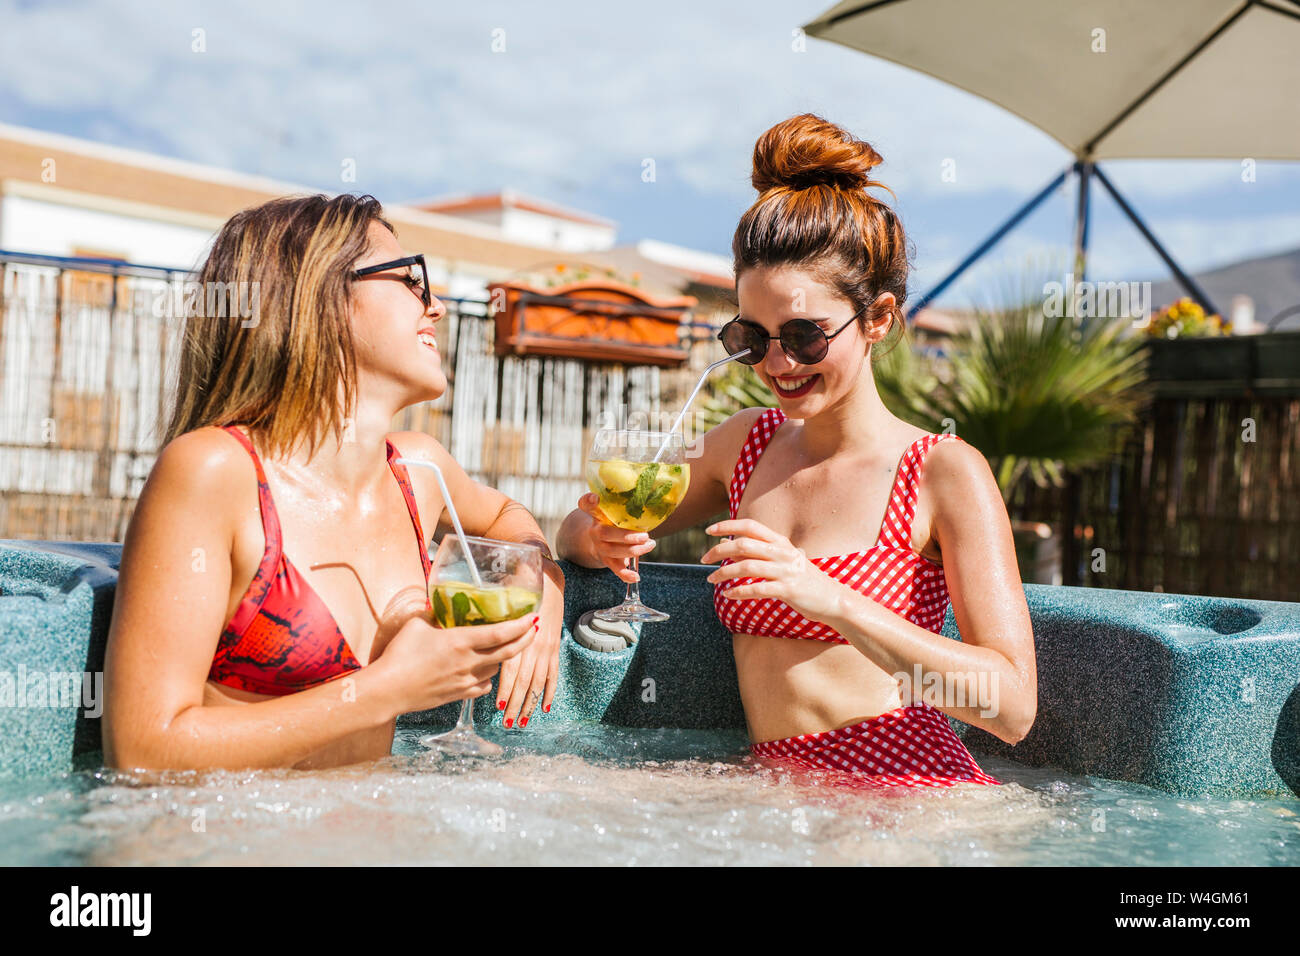 Two women having a drink in a jacuzzi Stock Photo